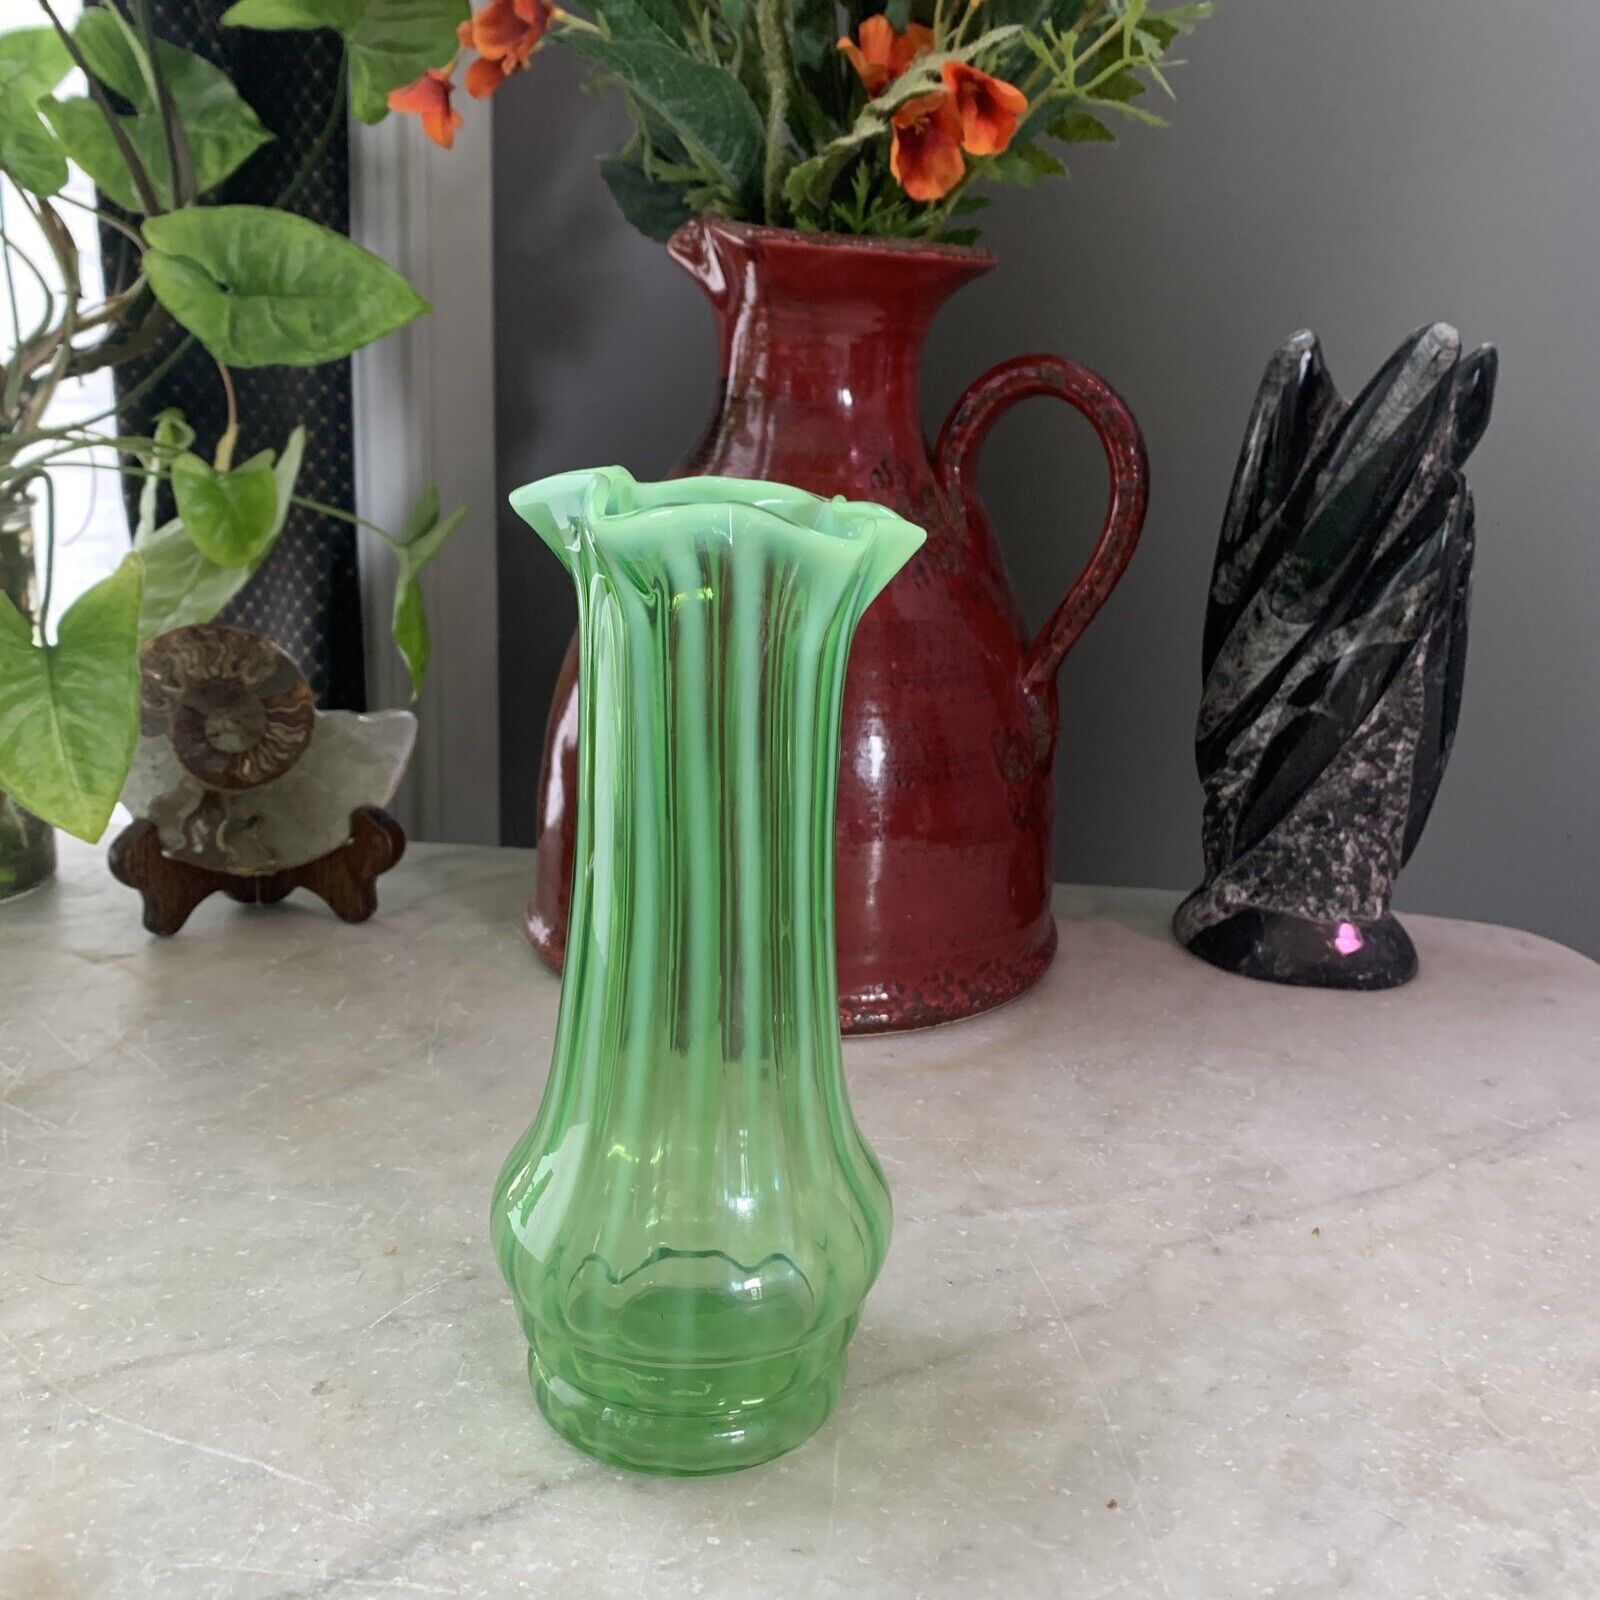 Antique Handblown Fluted Vase Made In Italy Late 1800s Rare